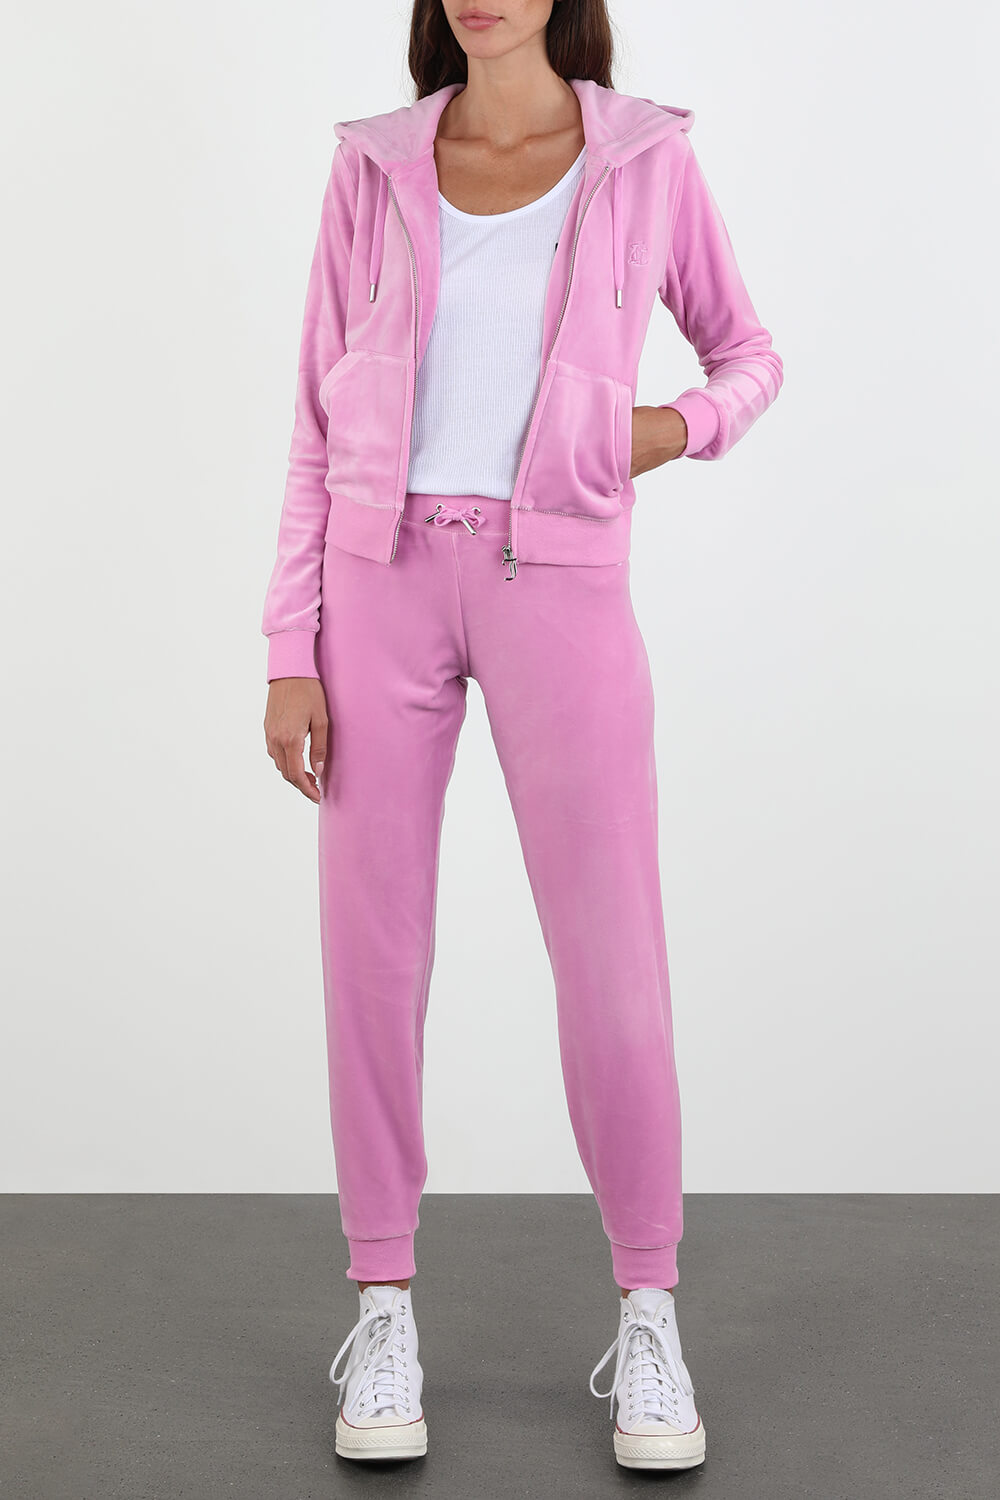 Classic Velour Hoodie in Pink JUICY COUTURE